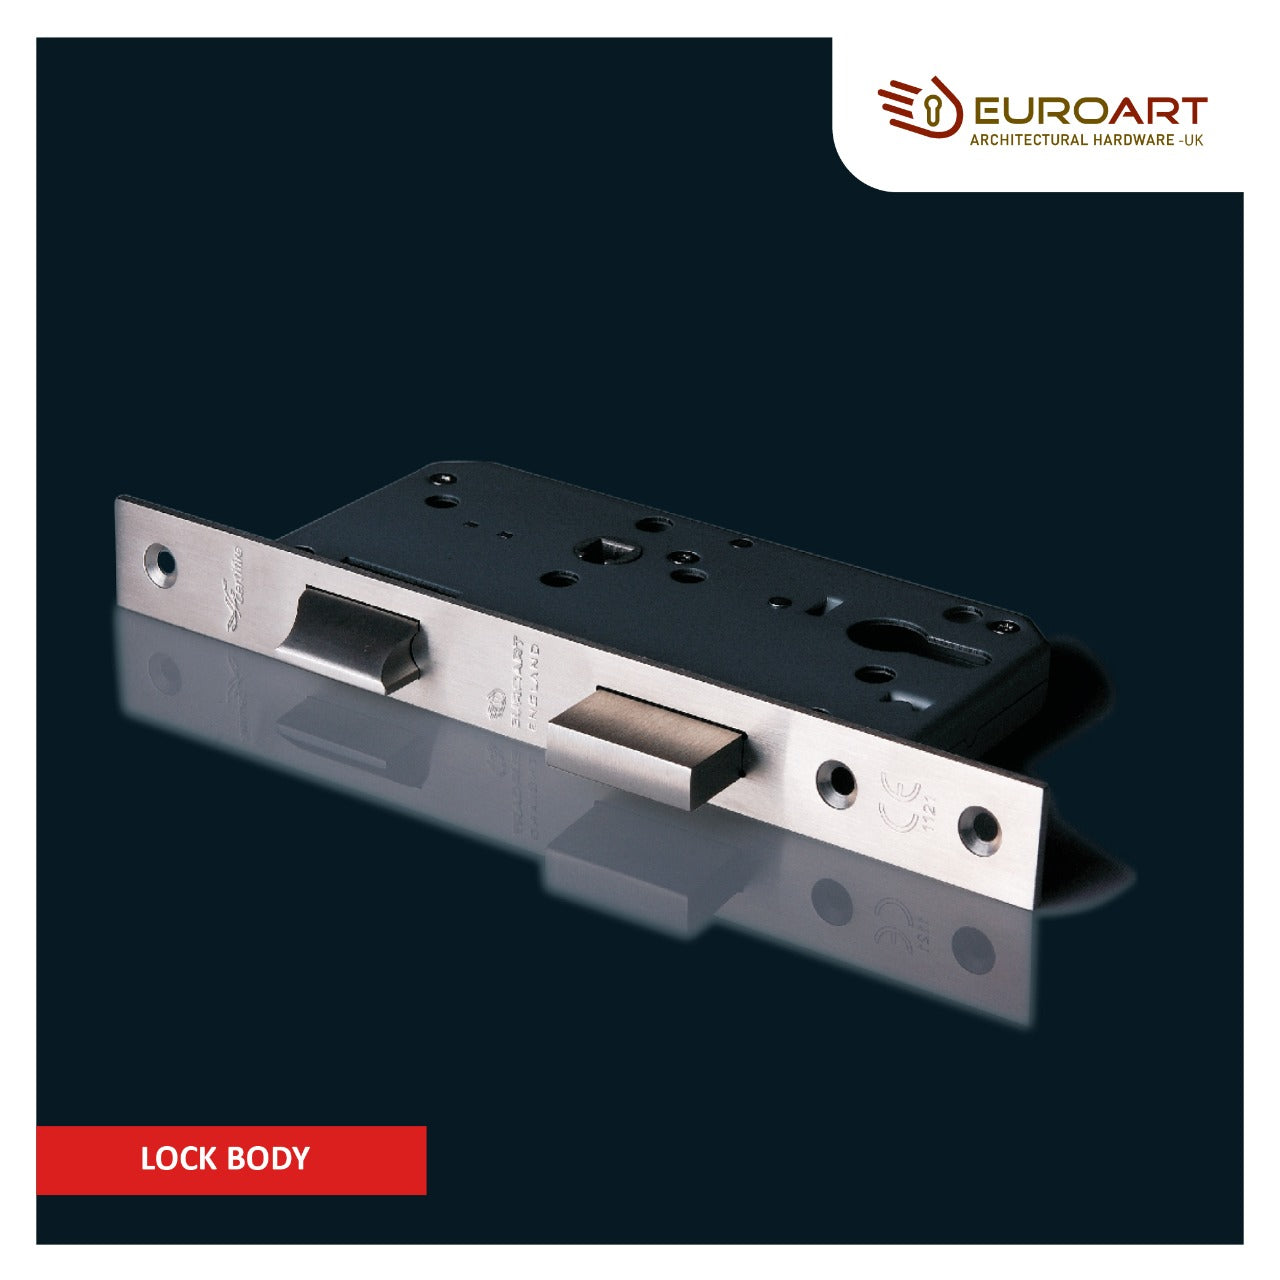 EuroArt Lock Bodies - High-quality lock bodies for enhanced security and functionality.